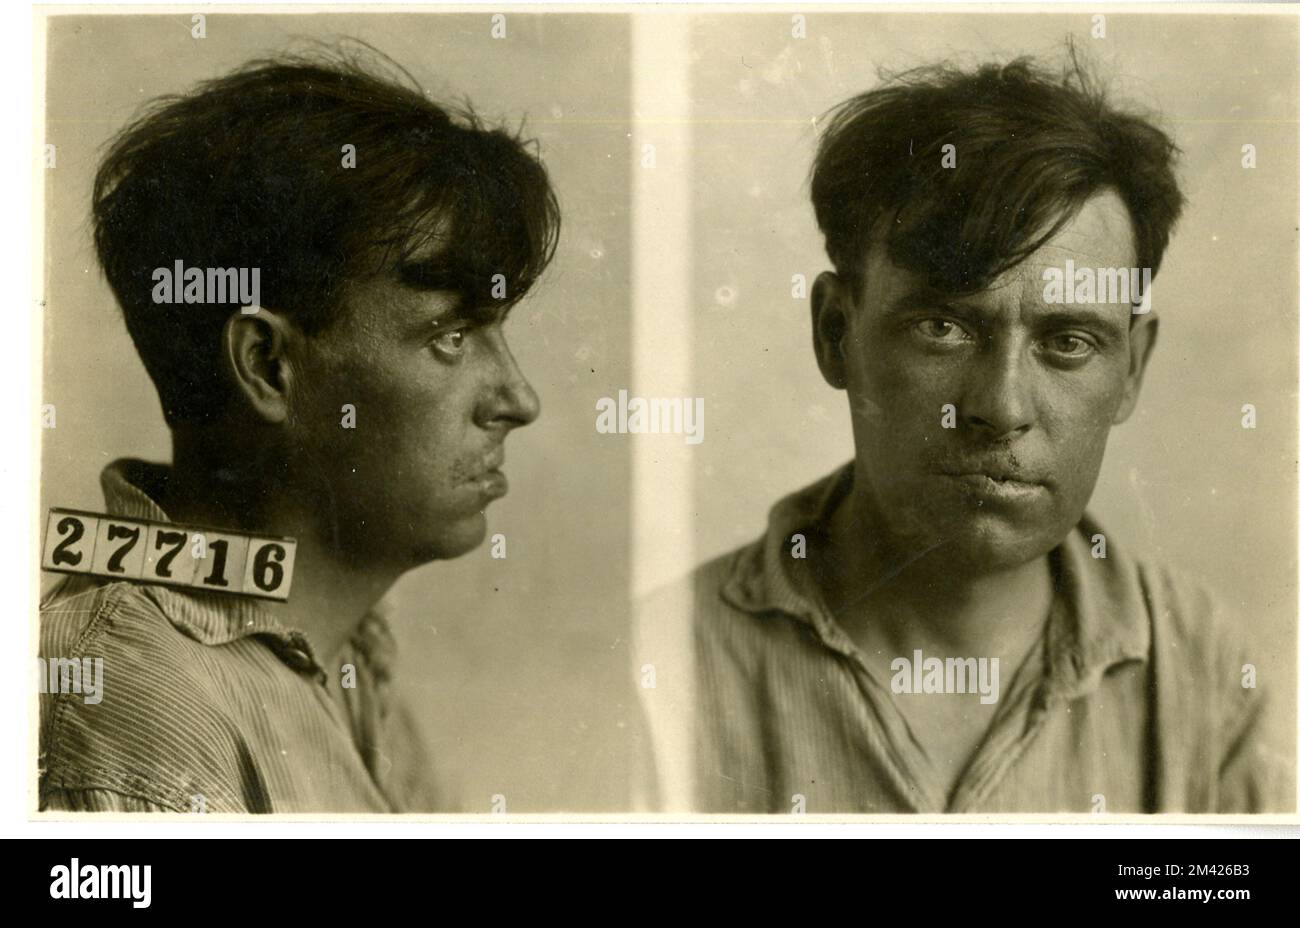 Photograph of Ray Stump. This item is the prison photograph, also known as the 'mug shot,' of Leavenworth inmate Ray Stump, register number 27716. Bureau of Prisons, Inmate case files. Stock Photo